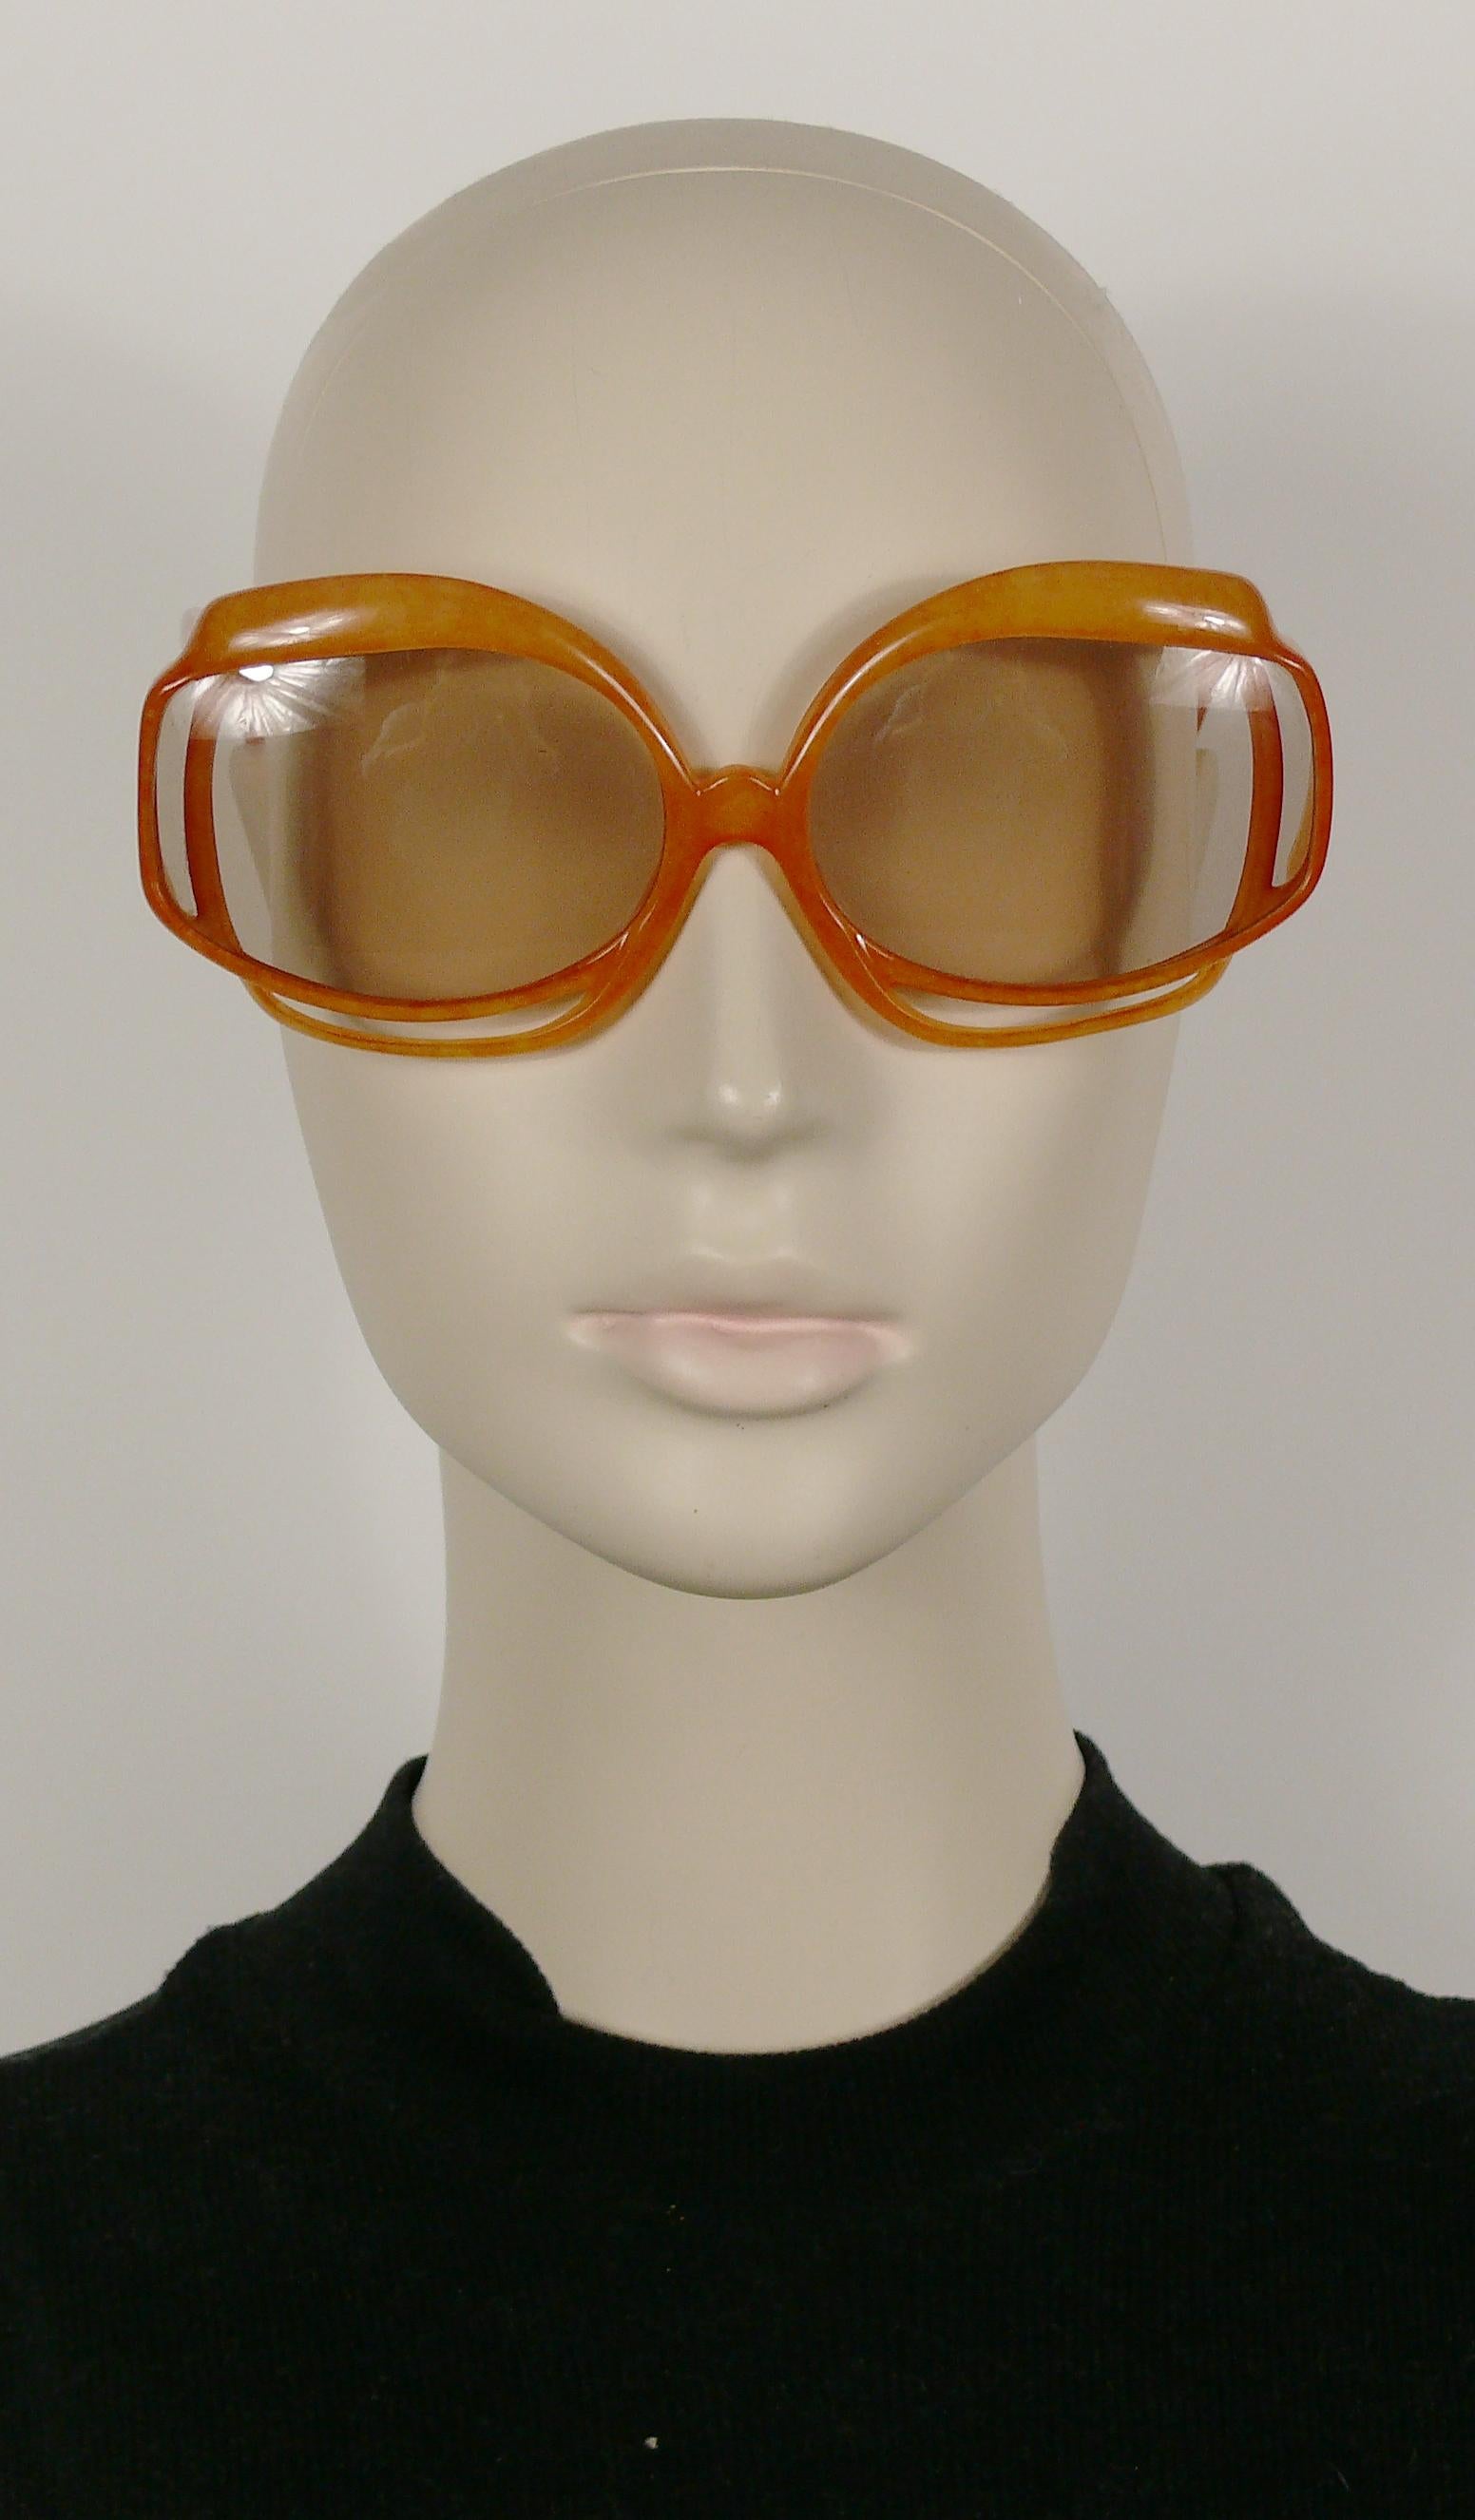 **** WE NO LONGER SHIP SUNGLASSES TO THE USA ****

CHRISTIAN DIOR vintage oversized sunglasses featuring a tangerine colour marbled frame, tinted plastic lenses and silver toned detailing. 

Marked CHRISTIAN DIOR.
OPTYL Made in